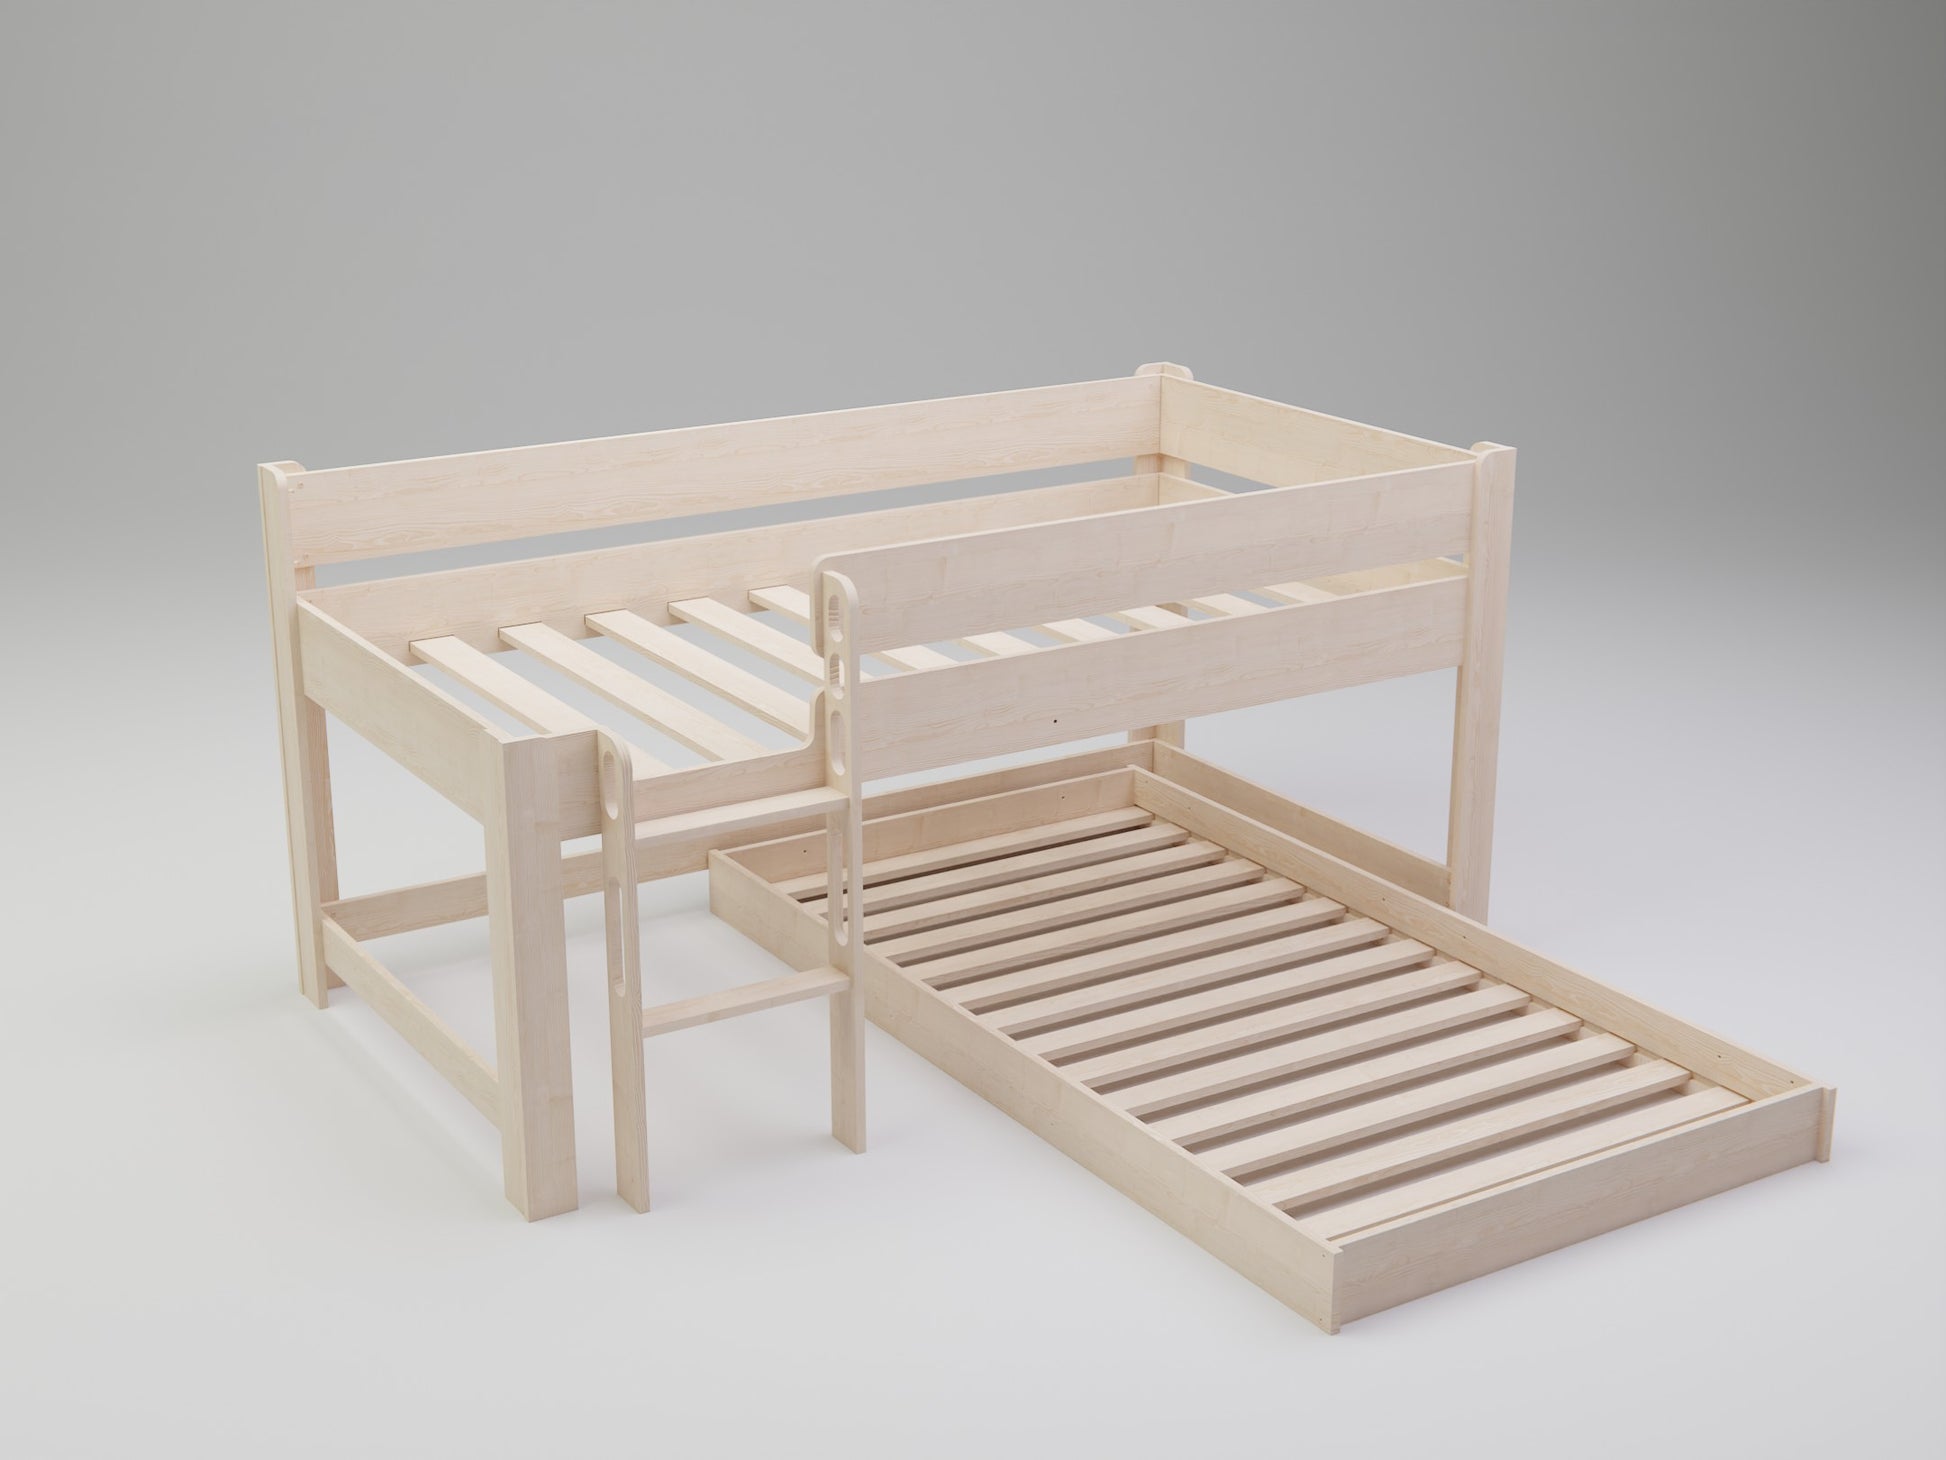 Elegance meets practicality: The L-Shape Bunk Bed Combo showcases the best of L shape designs.